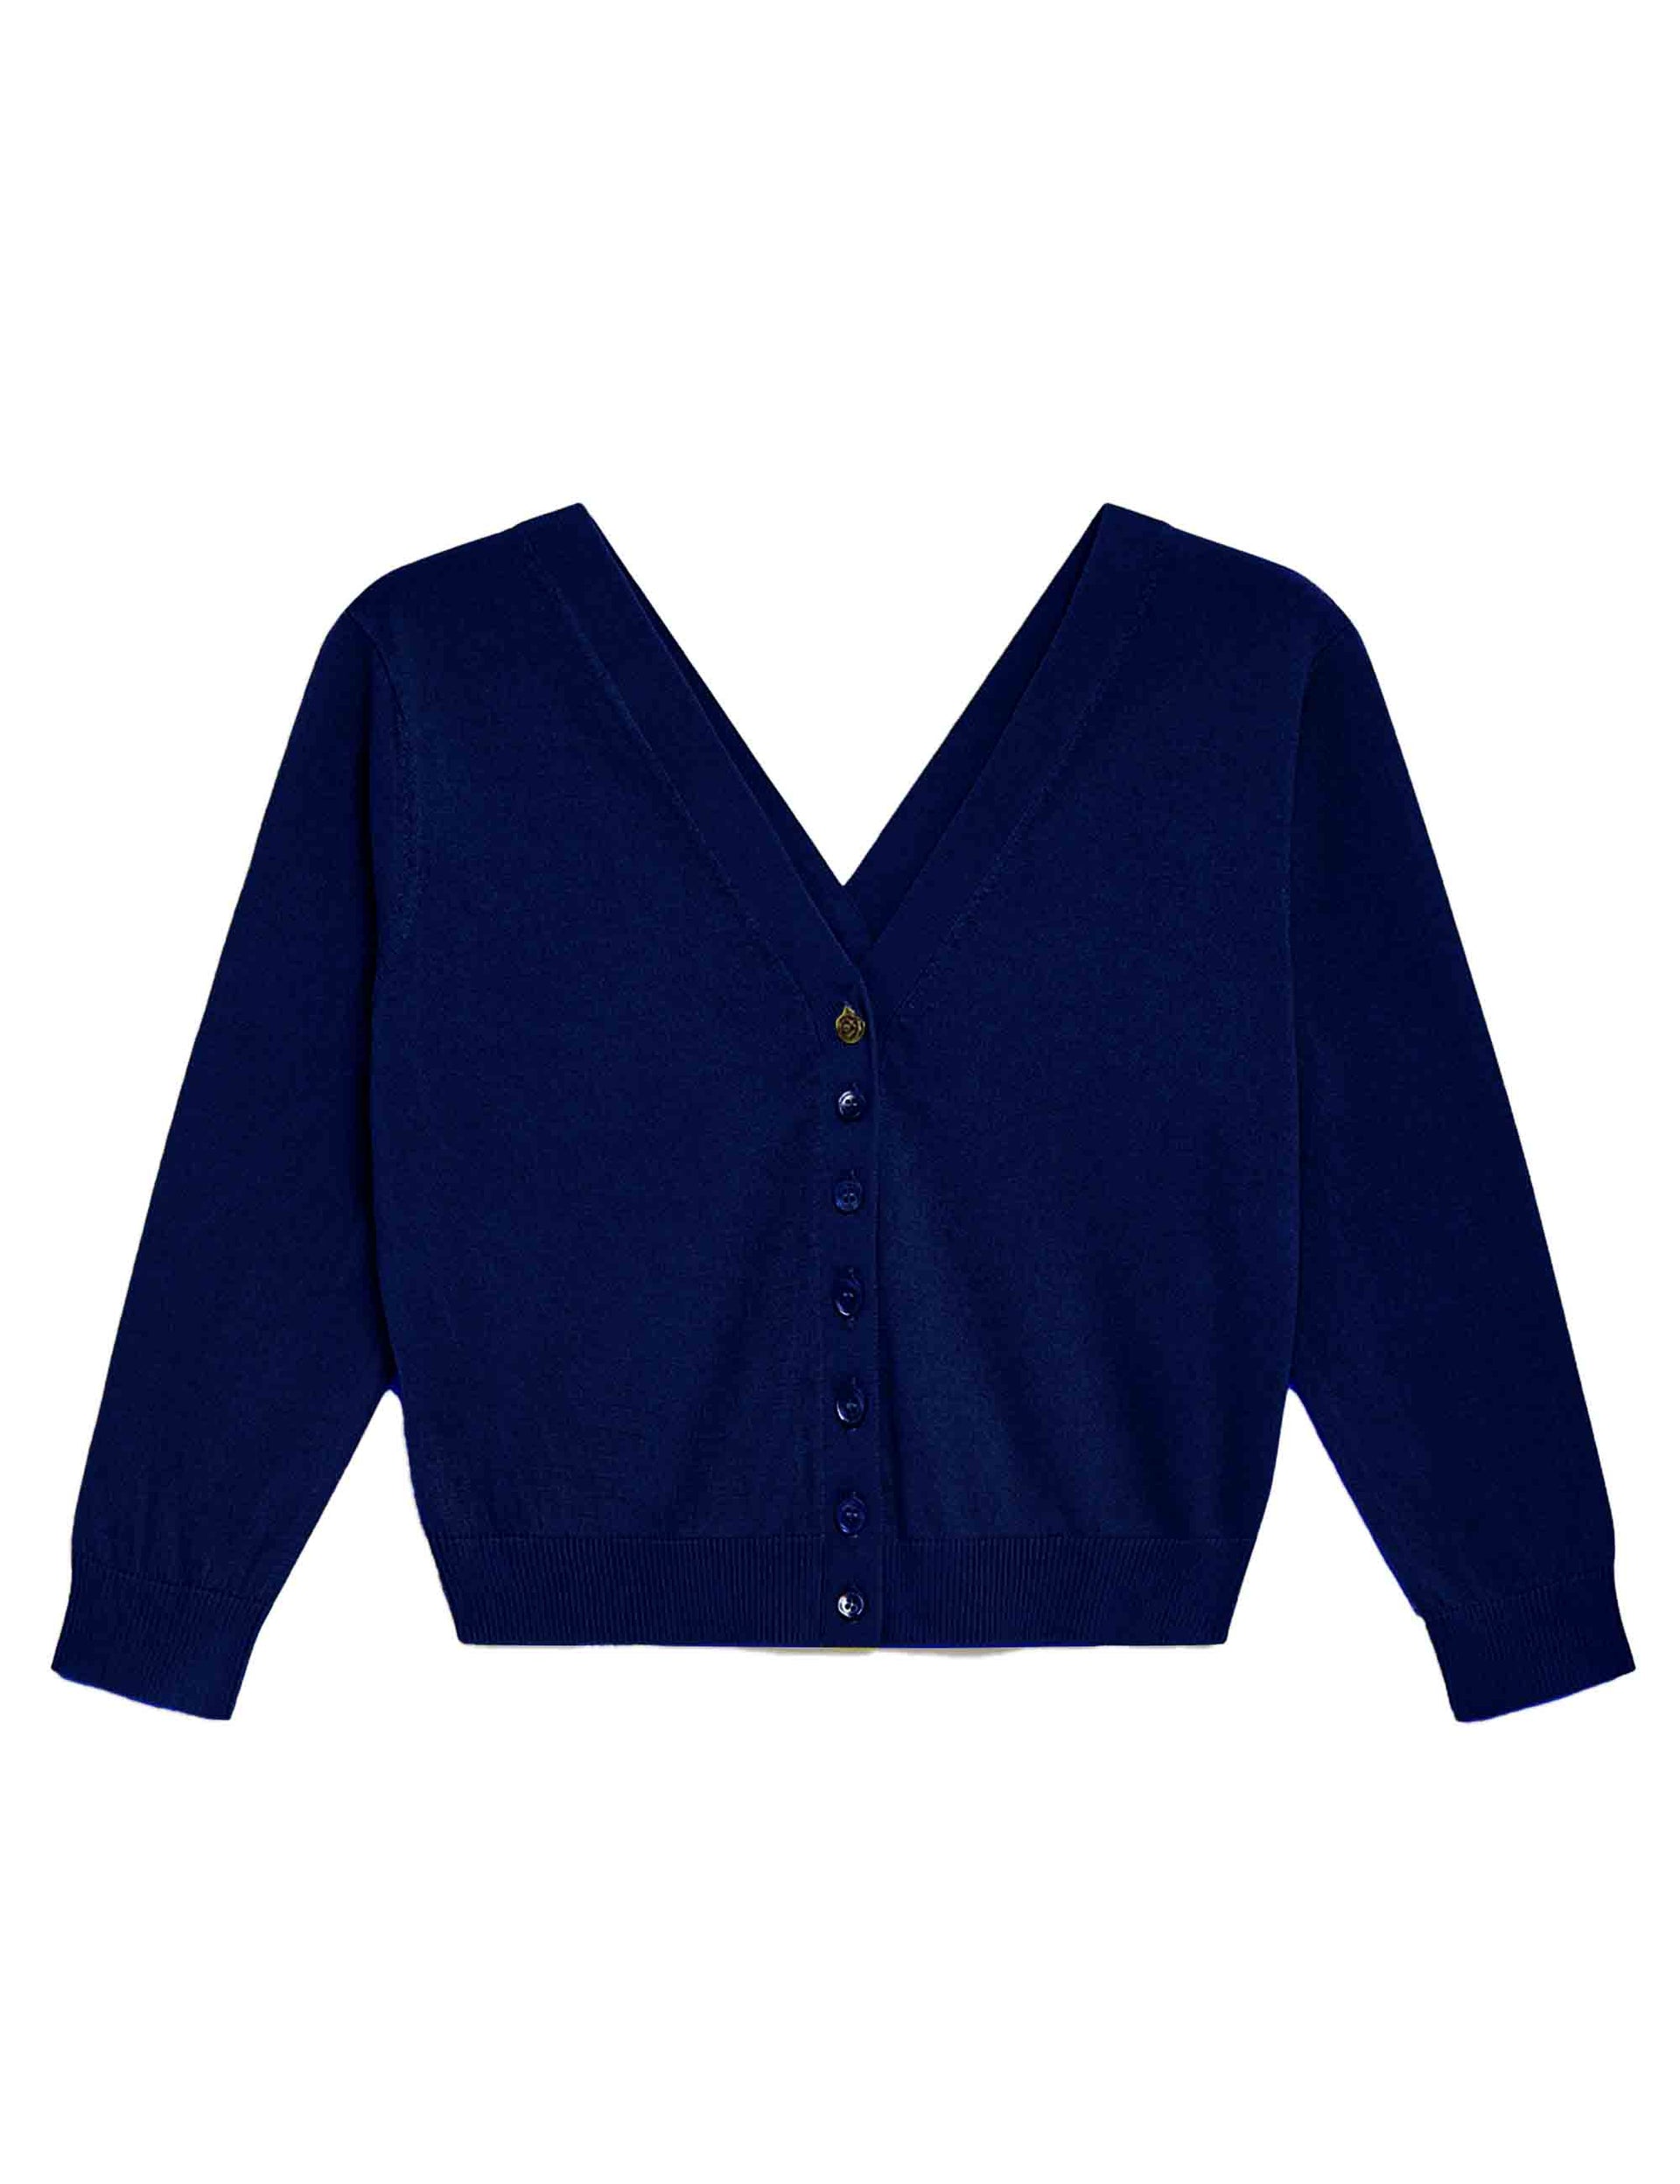 Smooth women's cardigan sweaters in blue cotton